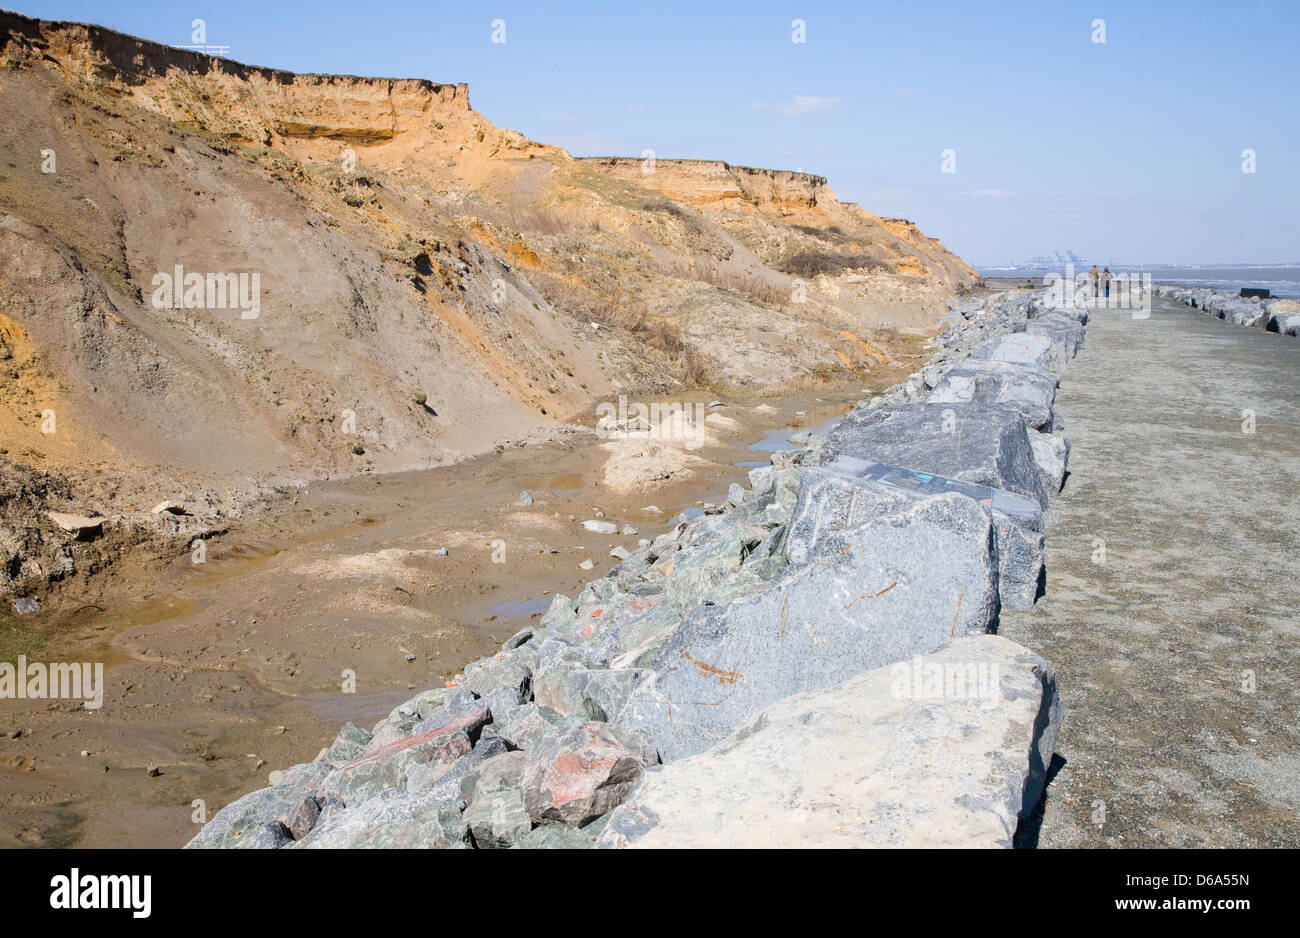 Crag Walk coastal defence and viewpoint structure, Walton on the Naze, Essex, England Stock Photo